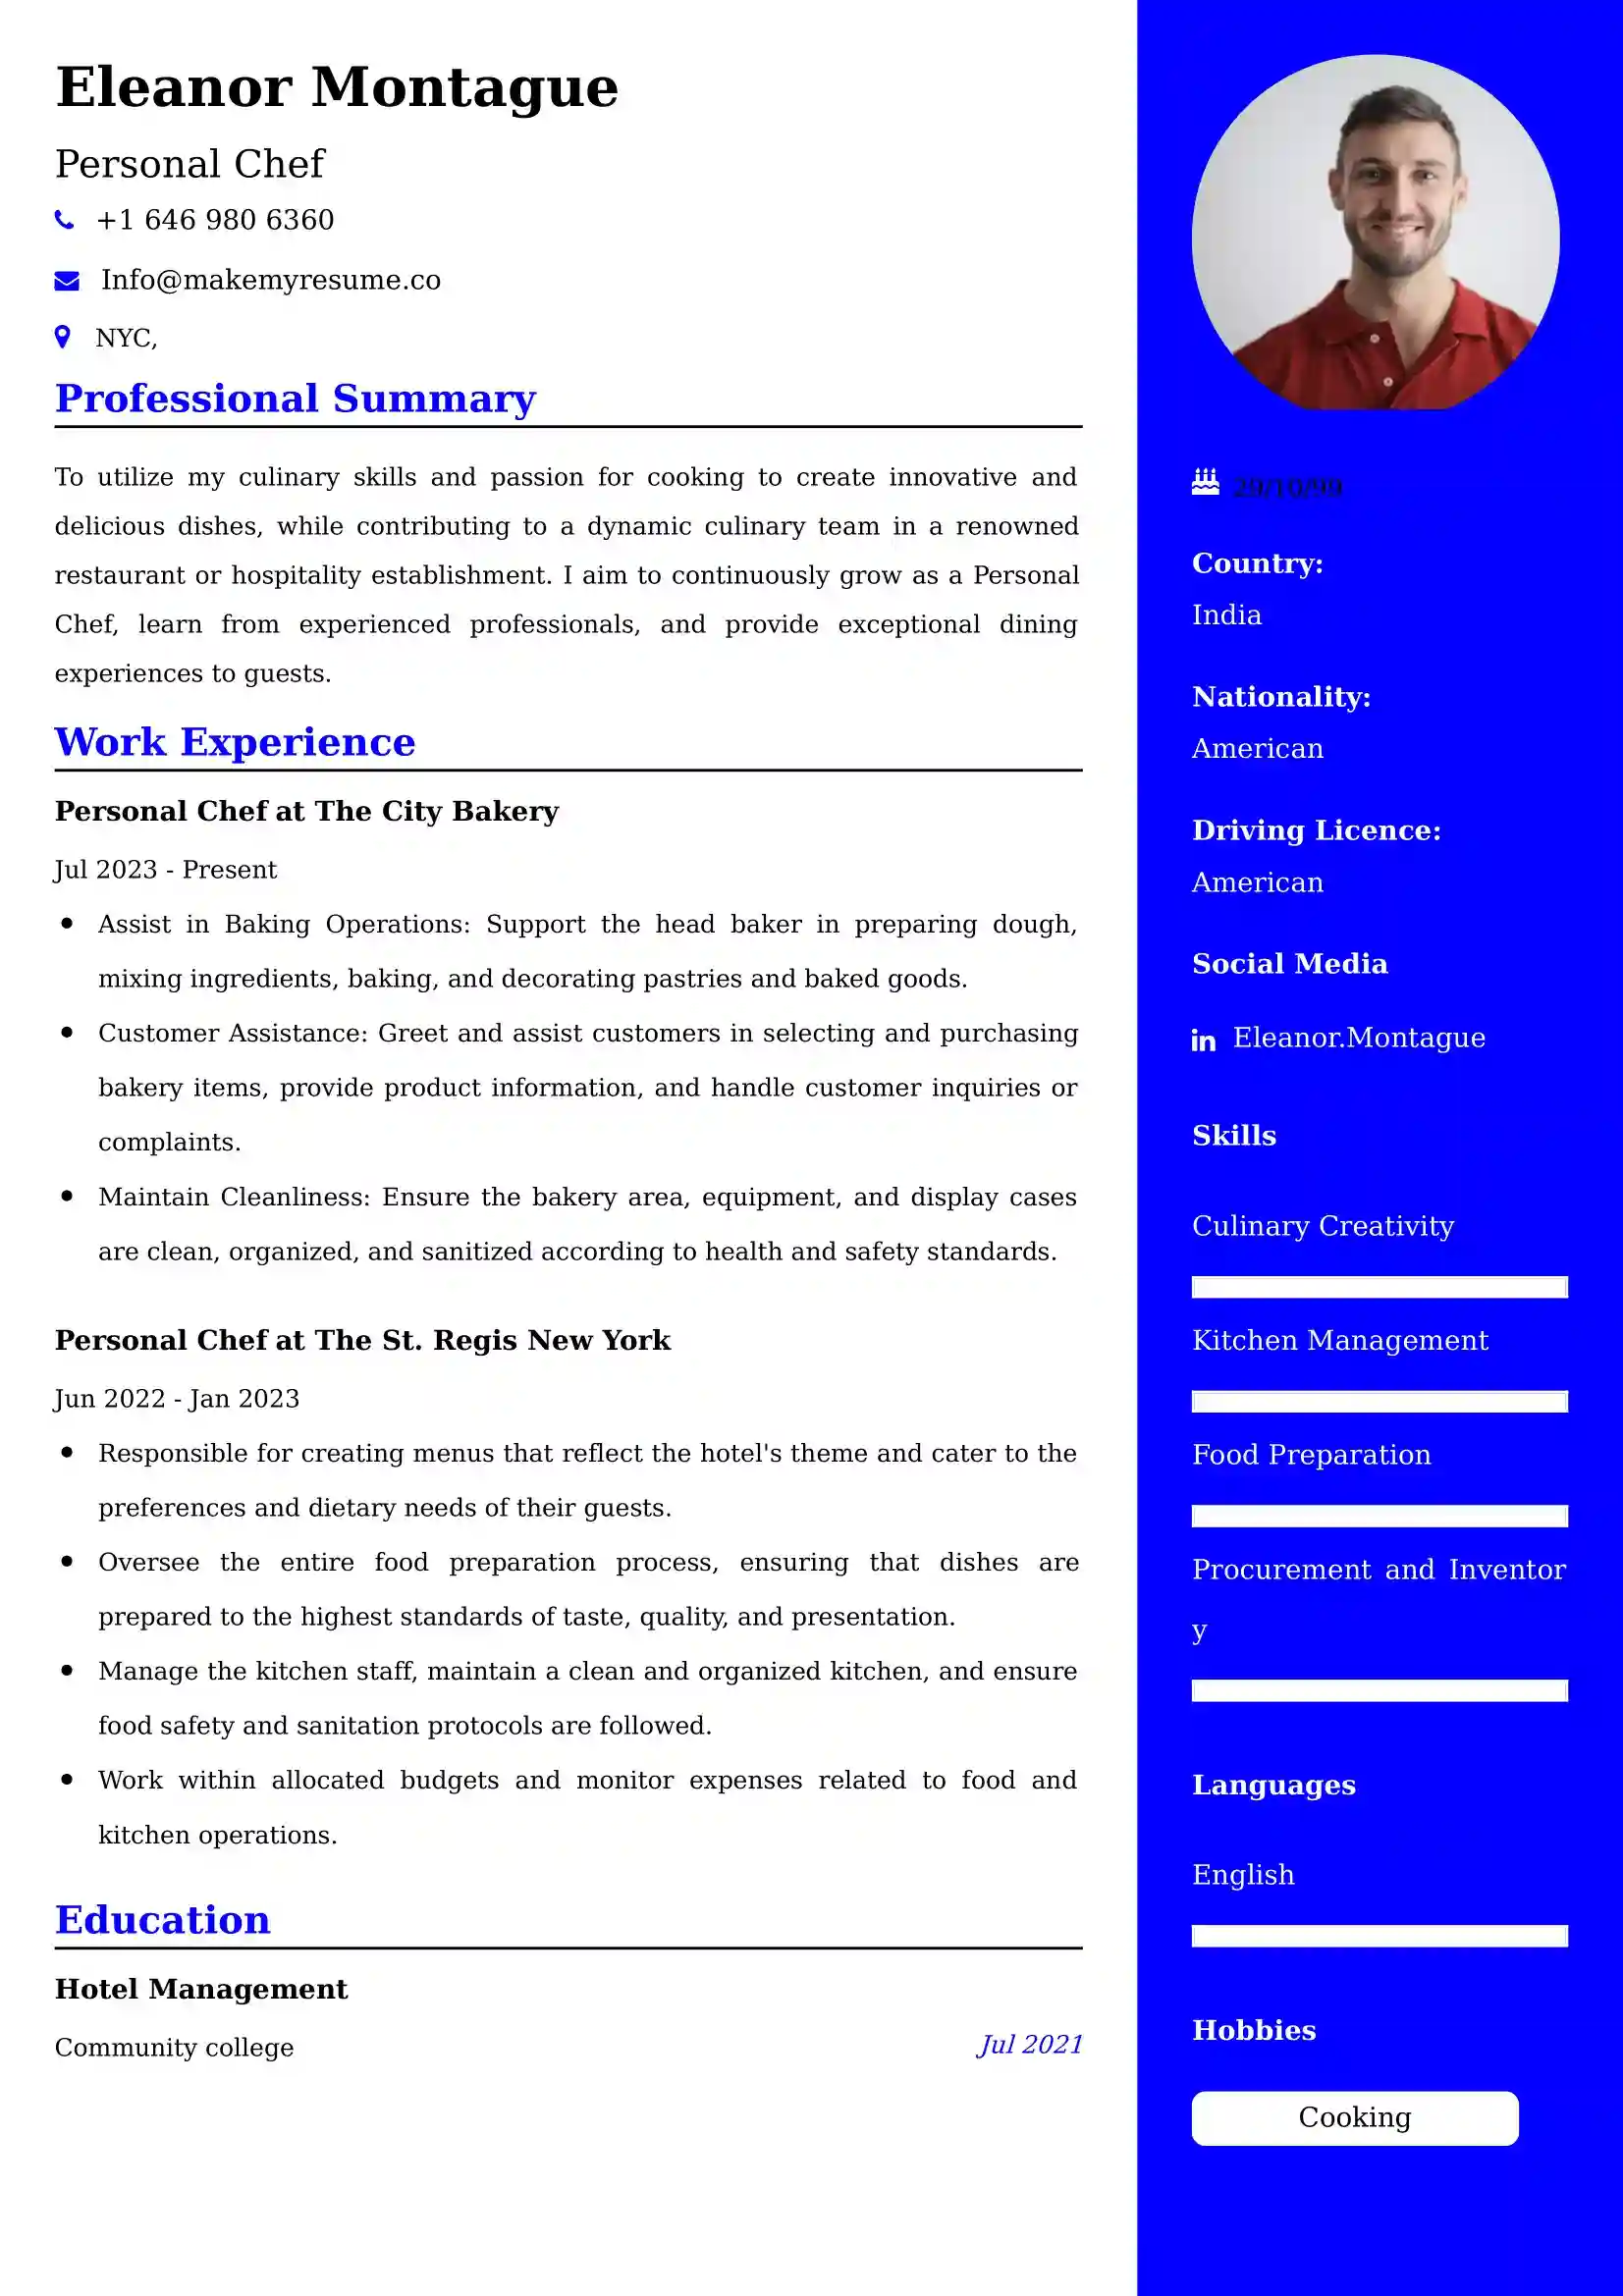 Personal Chef CV Examples - US Format